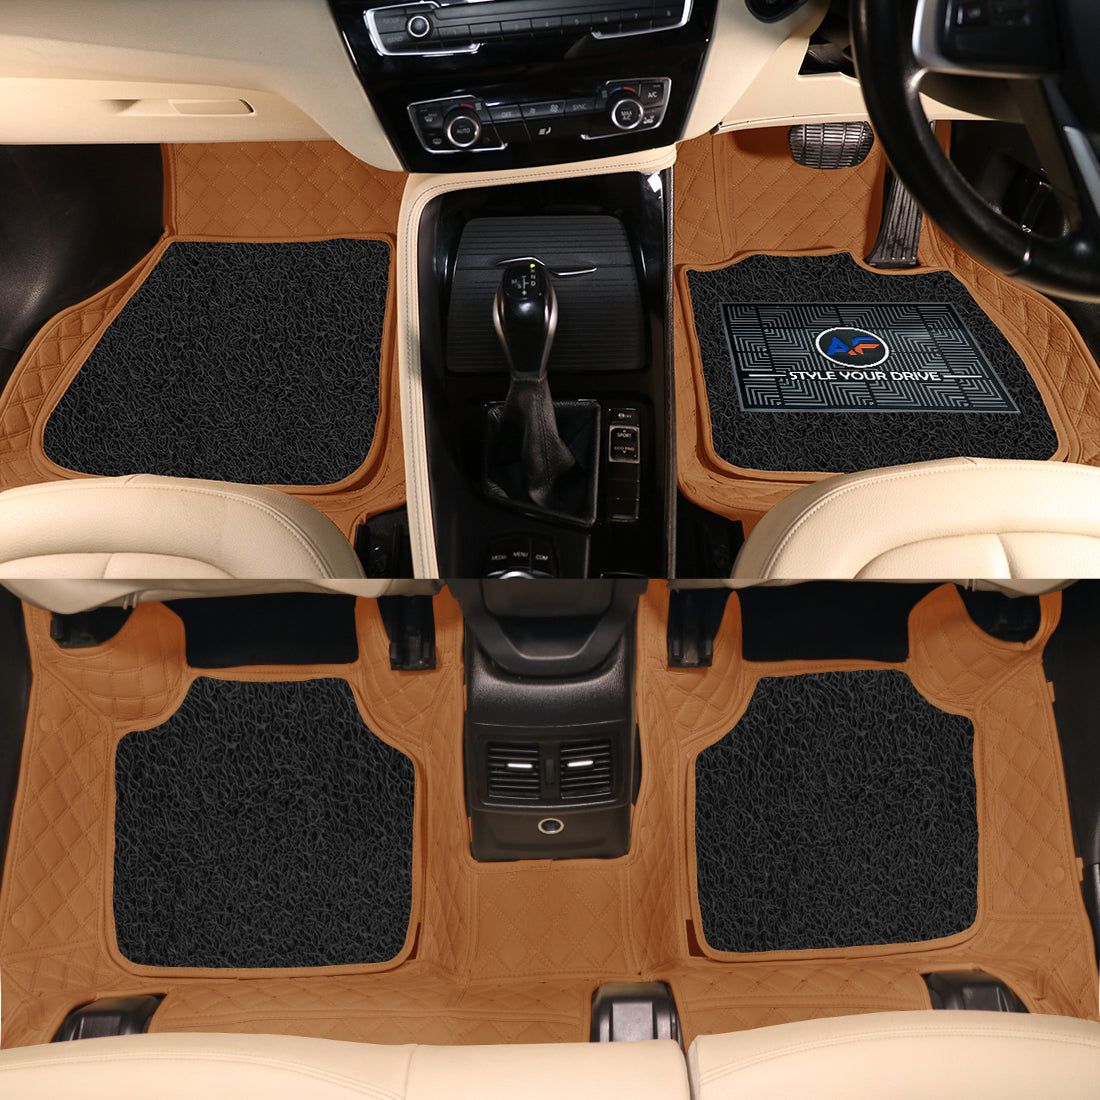 Bentley Continental 2010 7D Luxury Car Mat, All Weather Proof, Anti-Skid, 100% Waterproof & Odorless with Unique Diamond Fish Design (24mm Luxury PU Leather, 2 Rows)